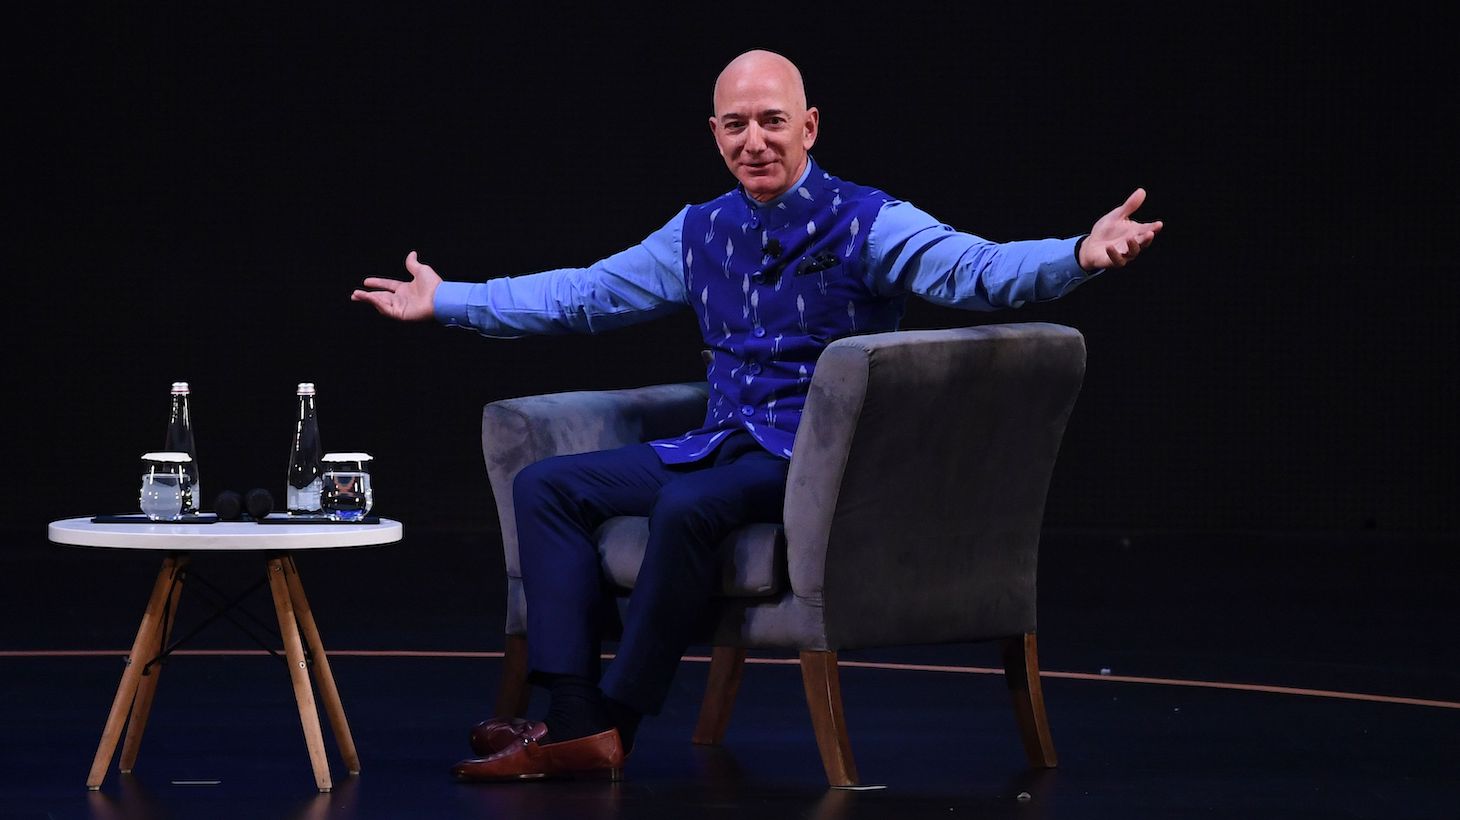 CEO of Amazon Jeff Bezos (R) gestures during the Amazon's annual Smbhav event in New Delhi on January 15, 2020. - Bezos, whose worth has been estimated at more than $110 billion, is officially in India for a meeting of business leaders in New Delhi. (Photo by Sajjad HUSSAIN / AFP) (Photo by SAJJAD HUSSAIN/AFP via Getty Images)